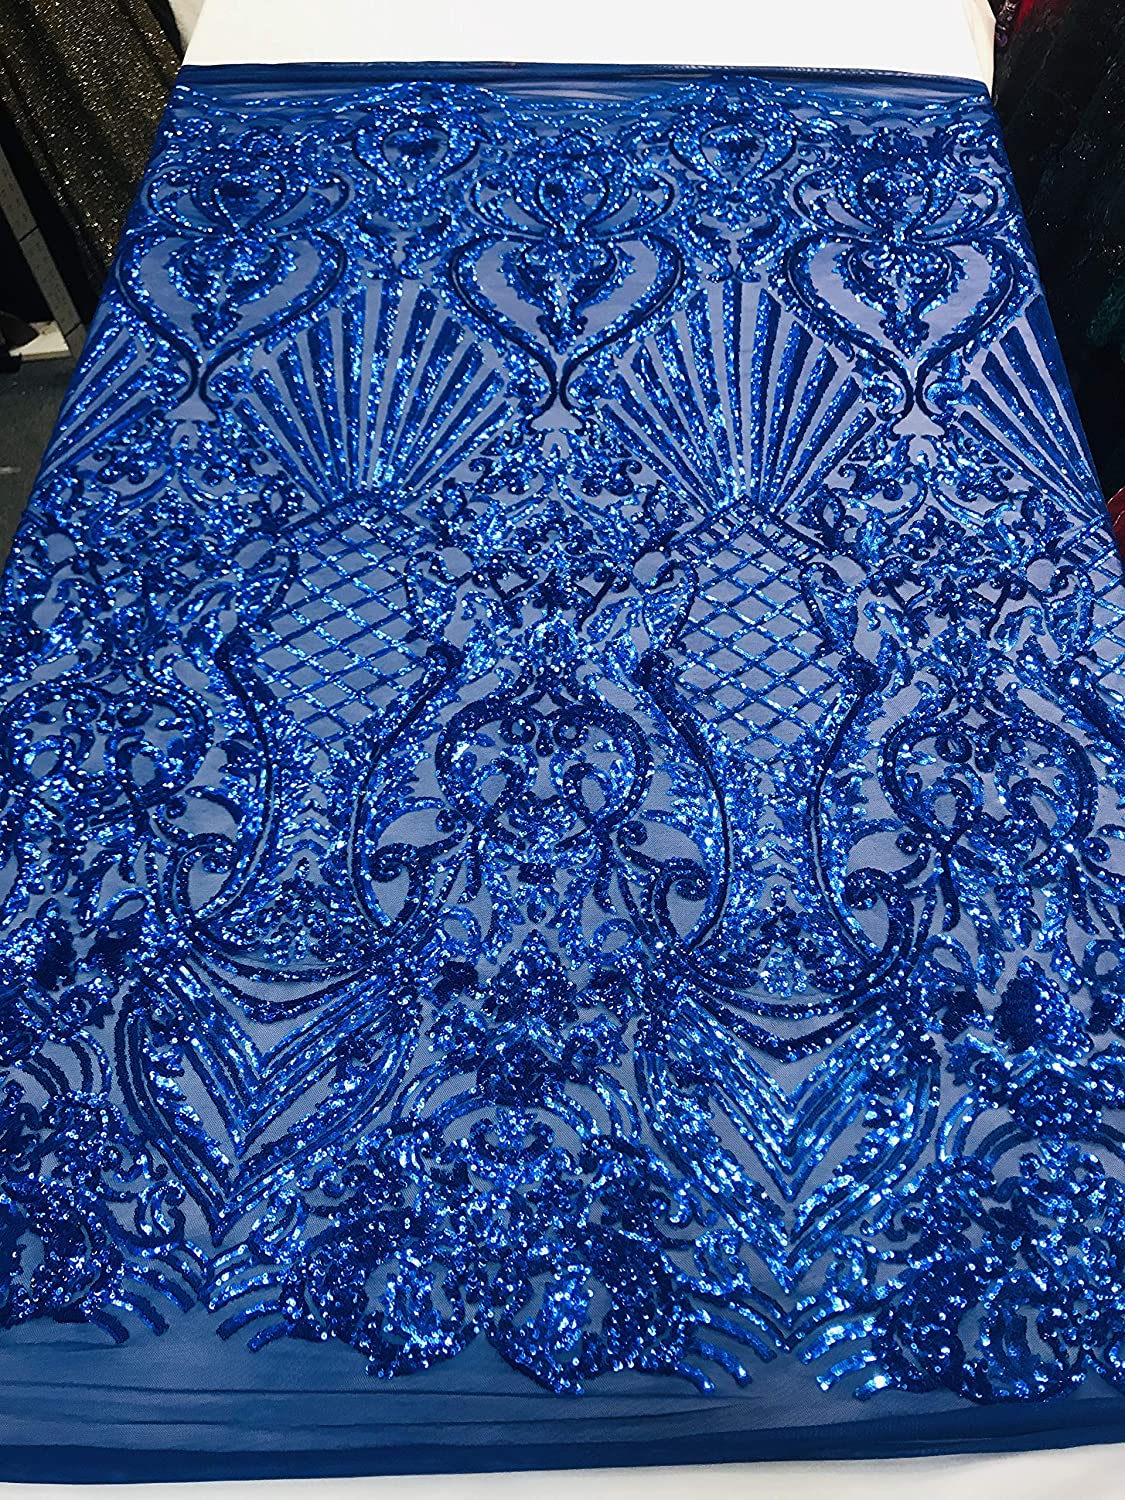 Damask Sequins Design on a 4 Way Stretch Mesh Fabric - for Night Gowns - Prom Dresses - (Royal Blue, 1 Yard)